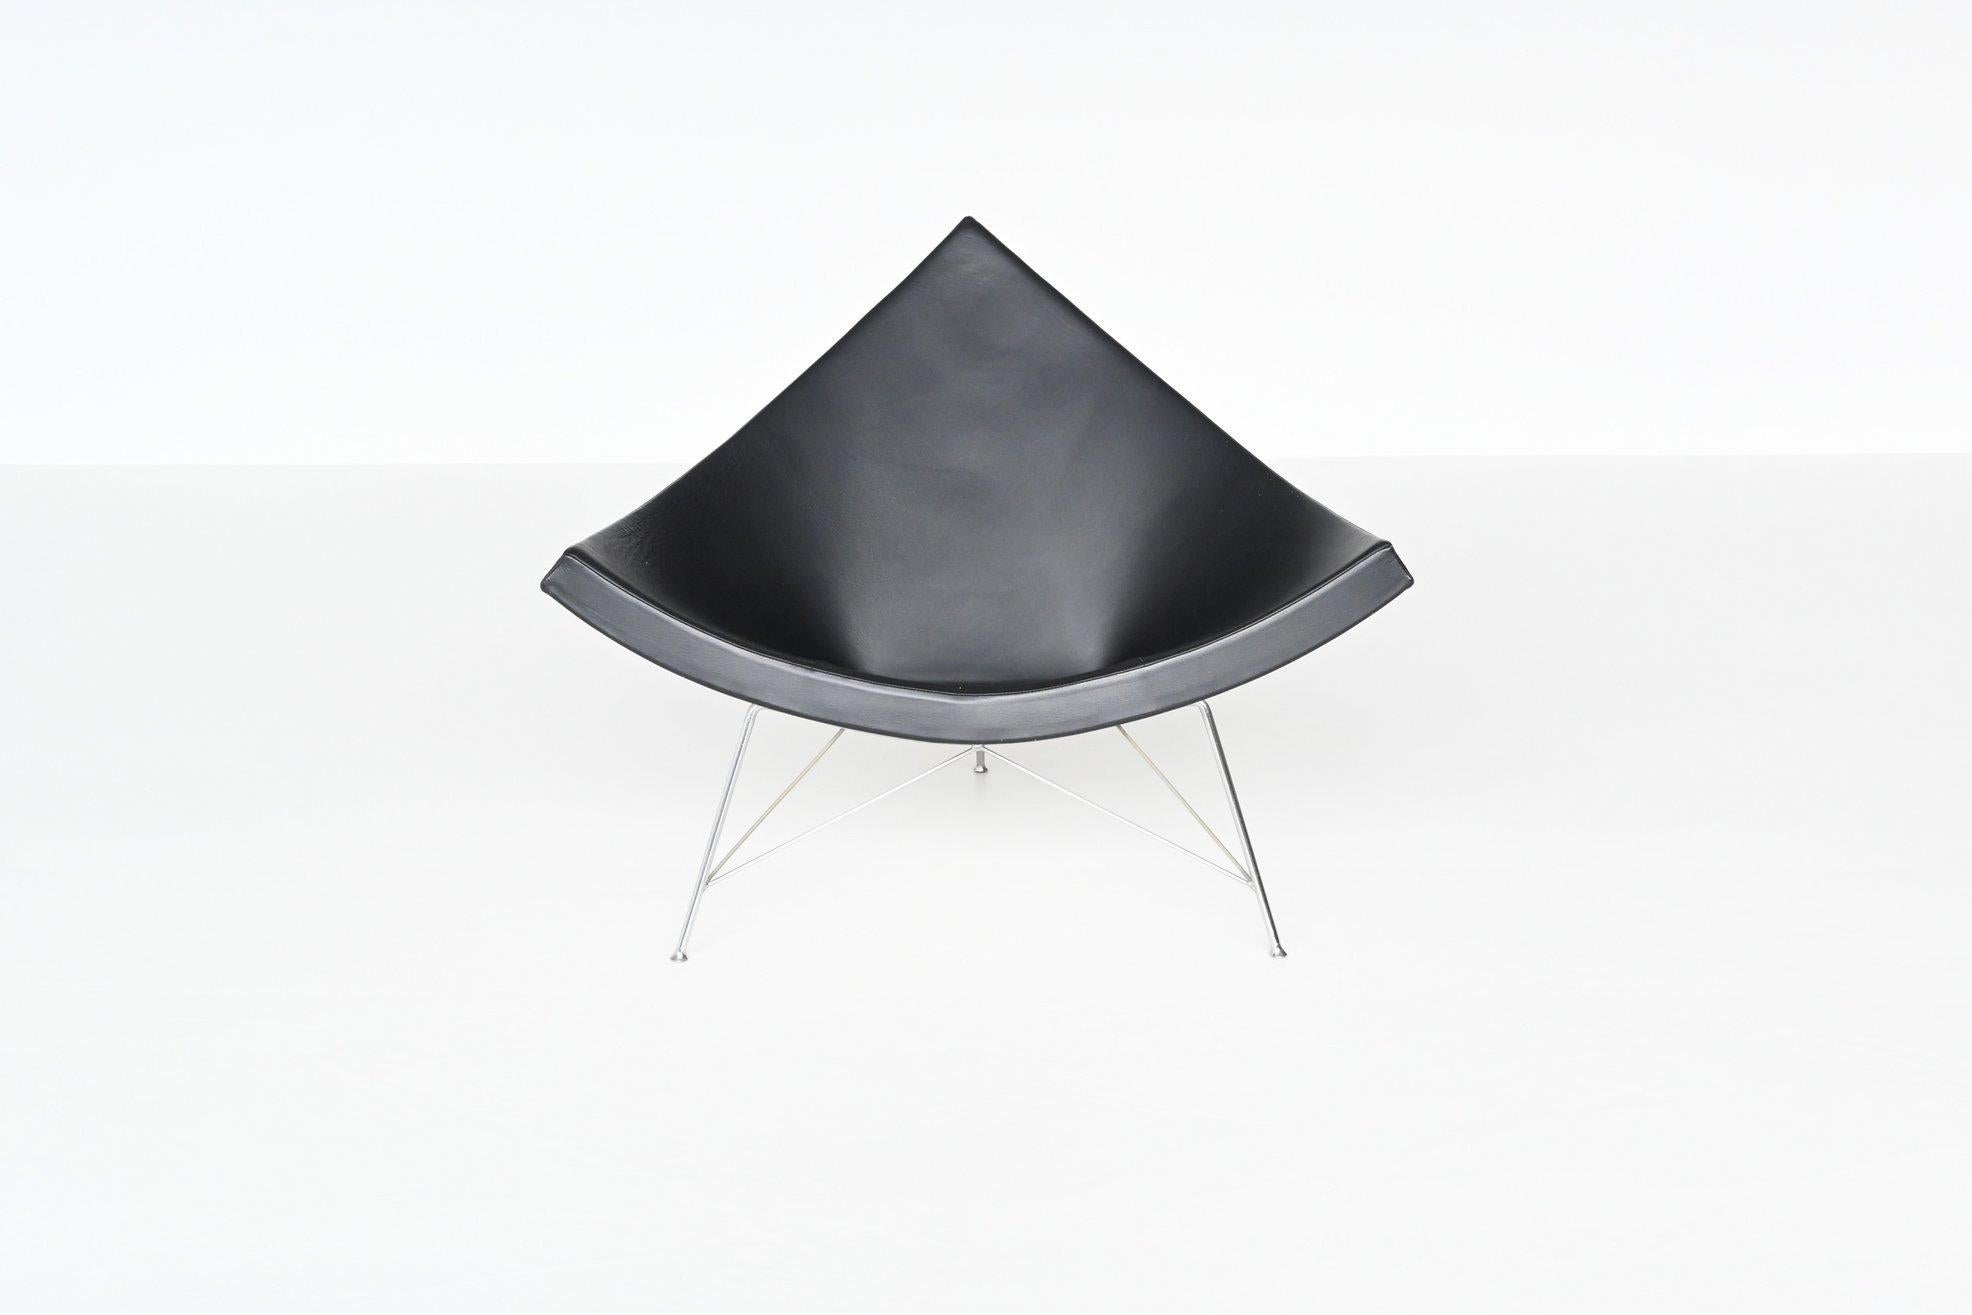 Iconic model Coconut lounge chair designed by George Nelson and manufactured by Vitra, United States 1955. This beautiful shaped chair consists of a triangular fiberglass shell which rests on an architectural brushed-steel tripod base. The seat